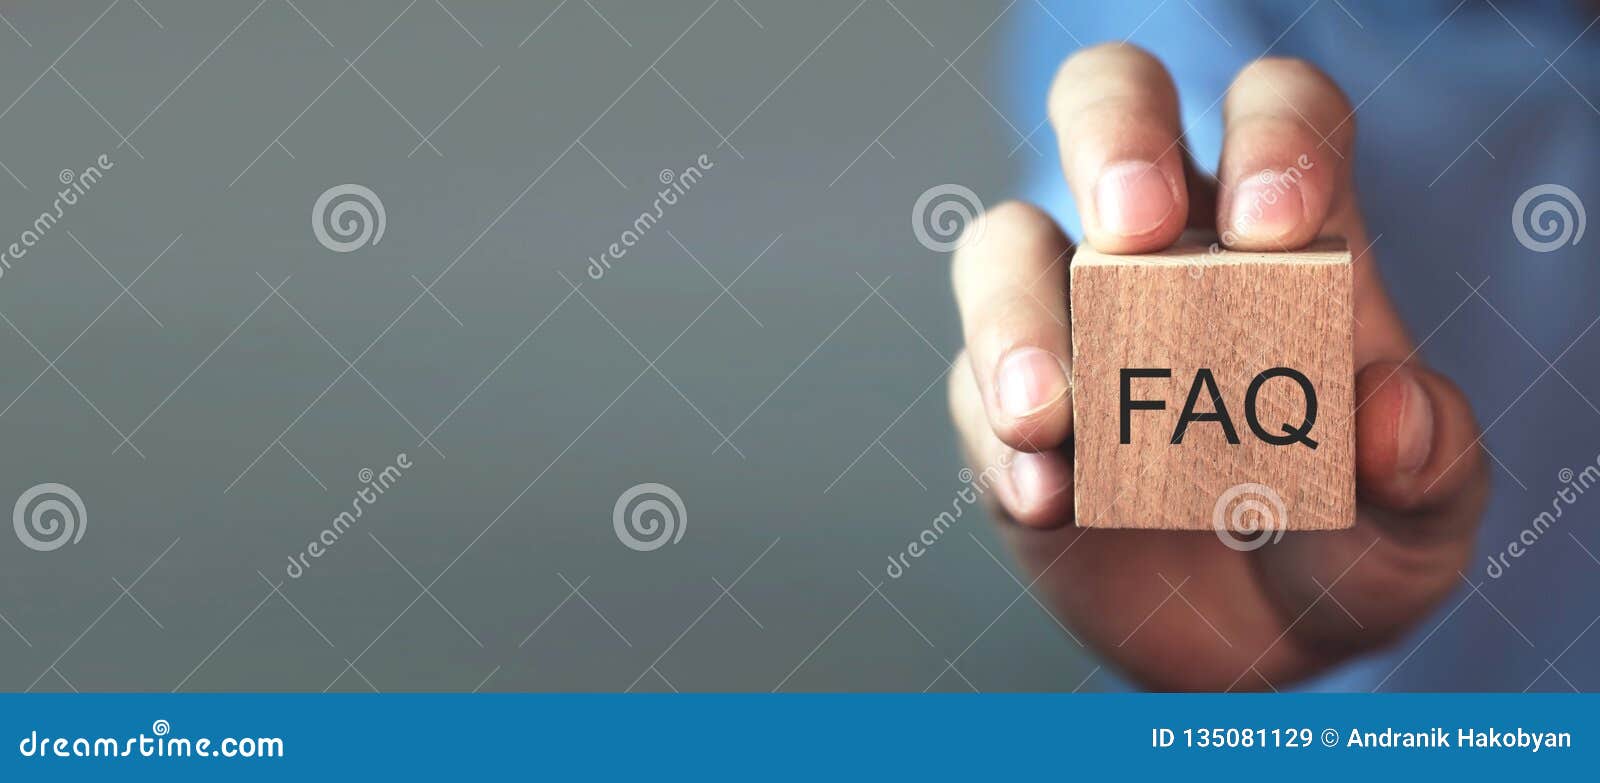 man holding faq message on wooden cube. frequently asked questions